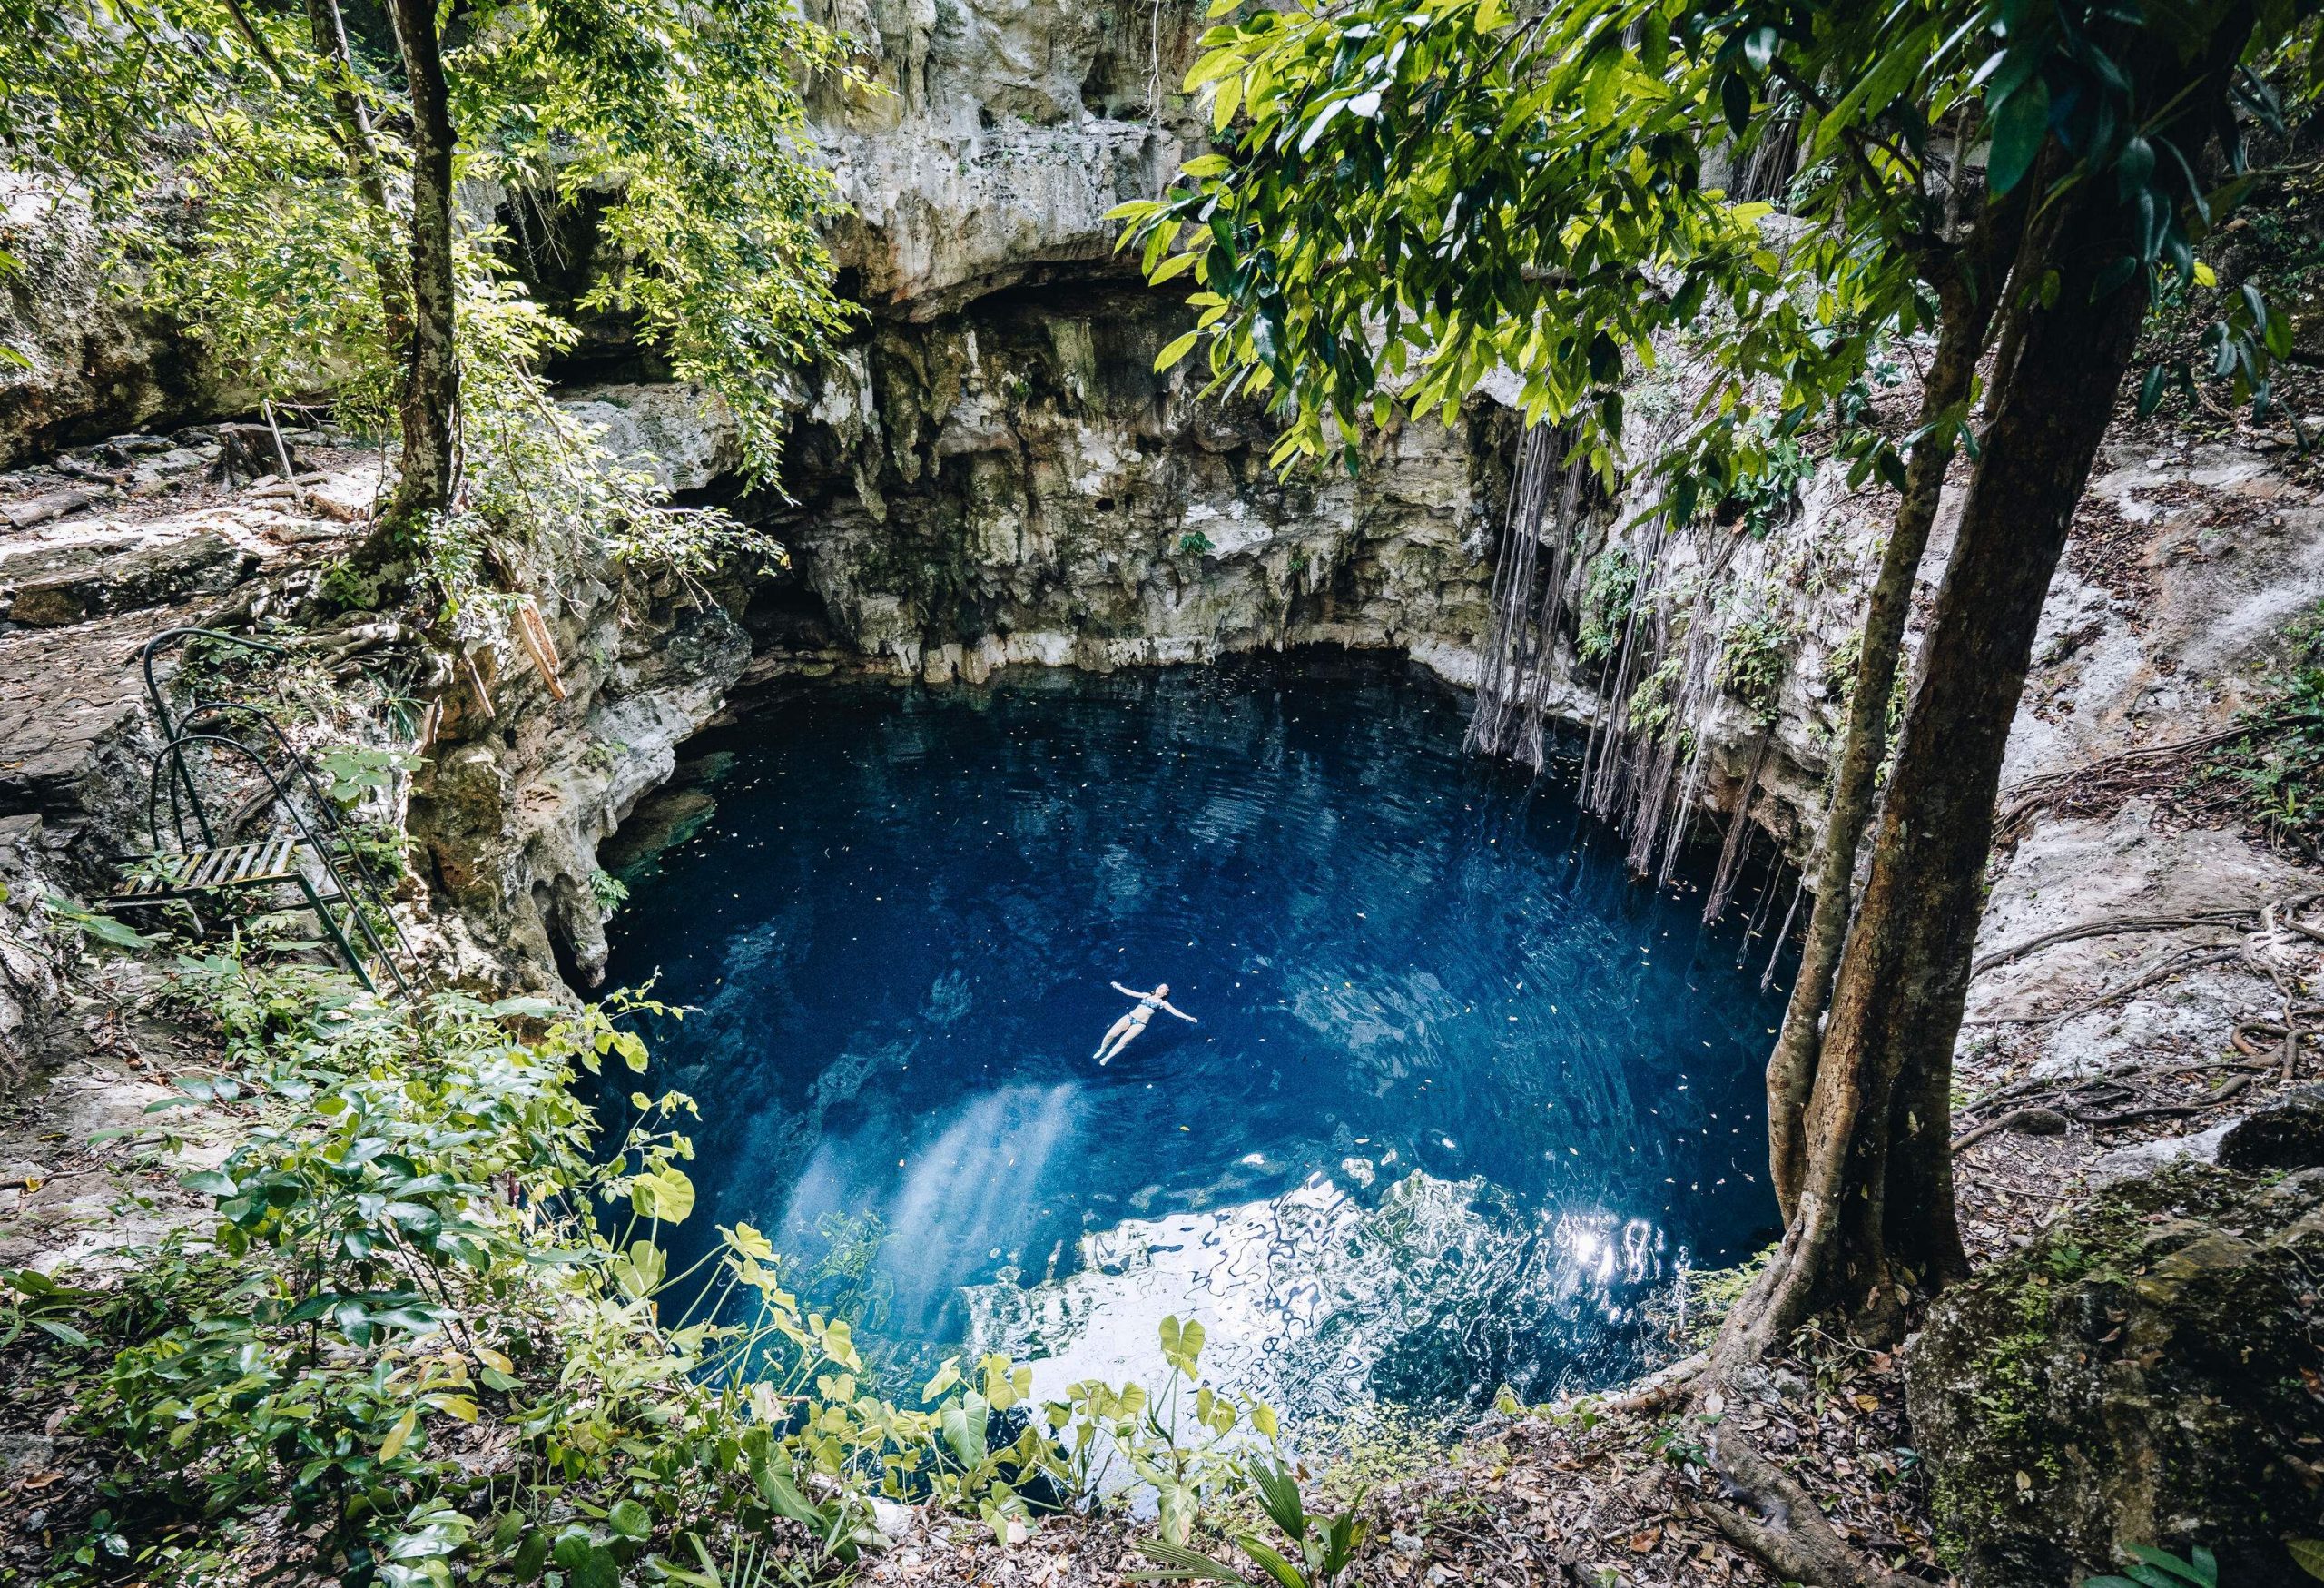 A woman floats on her back in the middle of a natural pit with clear waters.